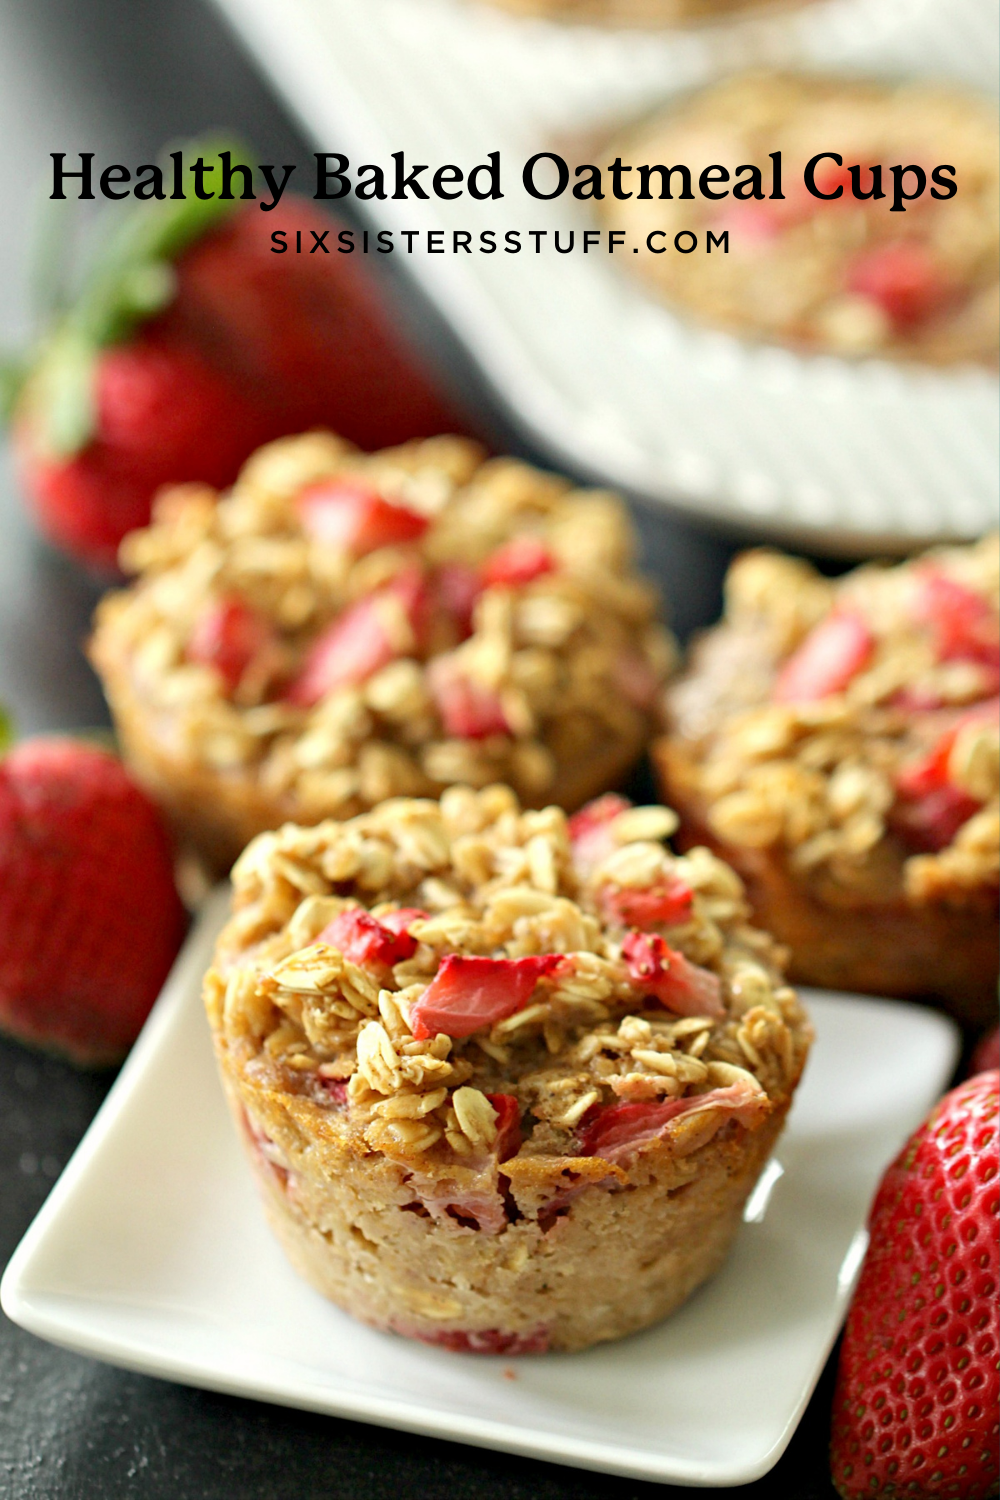 Strawberry Baked Oatmeal Cups